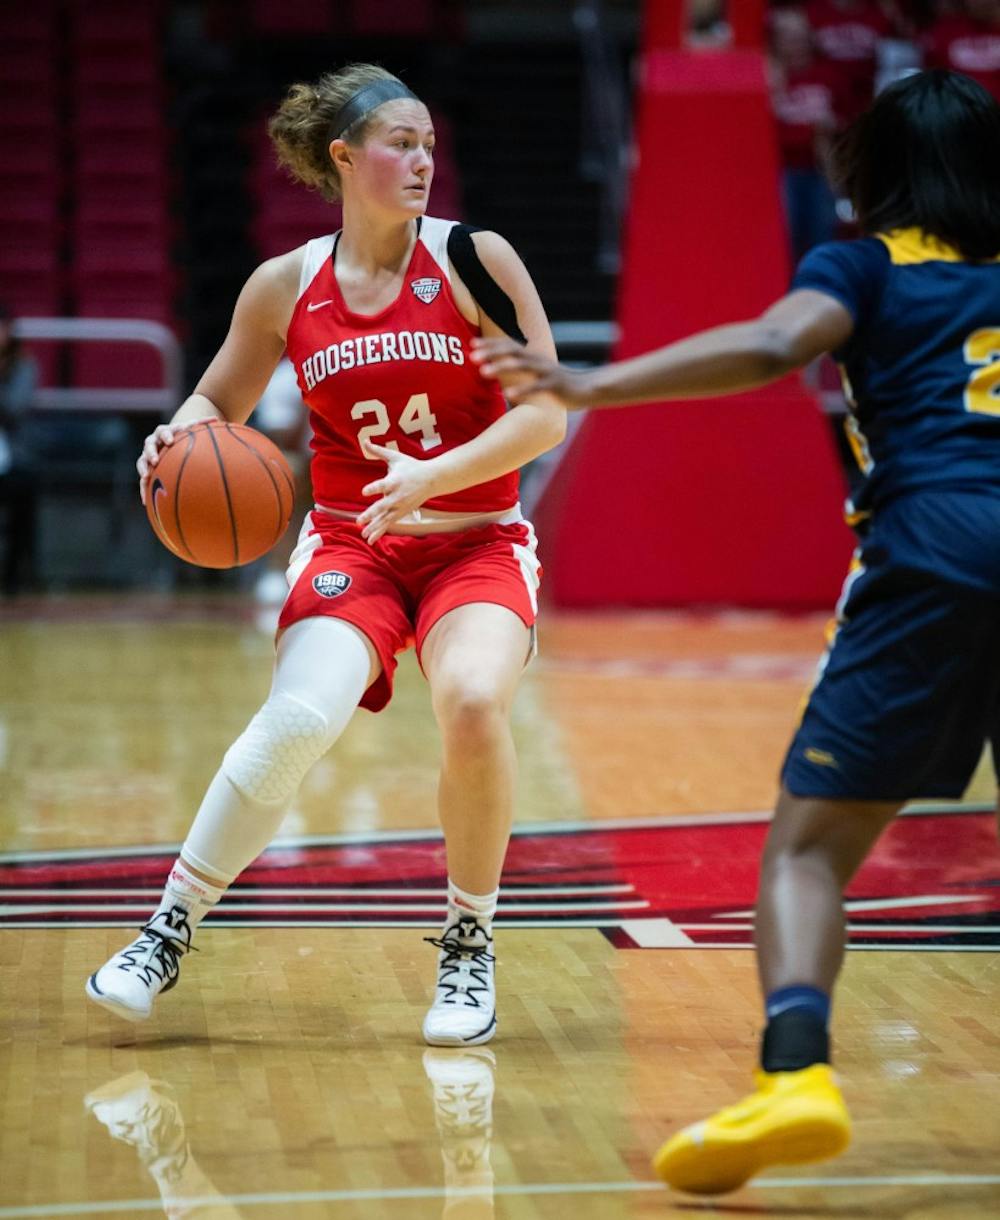 Ball State Women’s Basketball loses double-digit lead, falls to Eastern Michigan